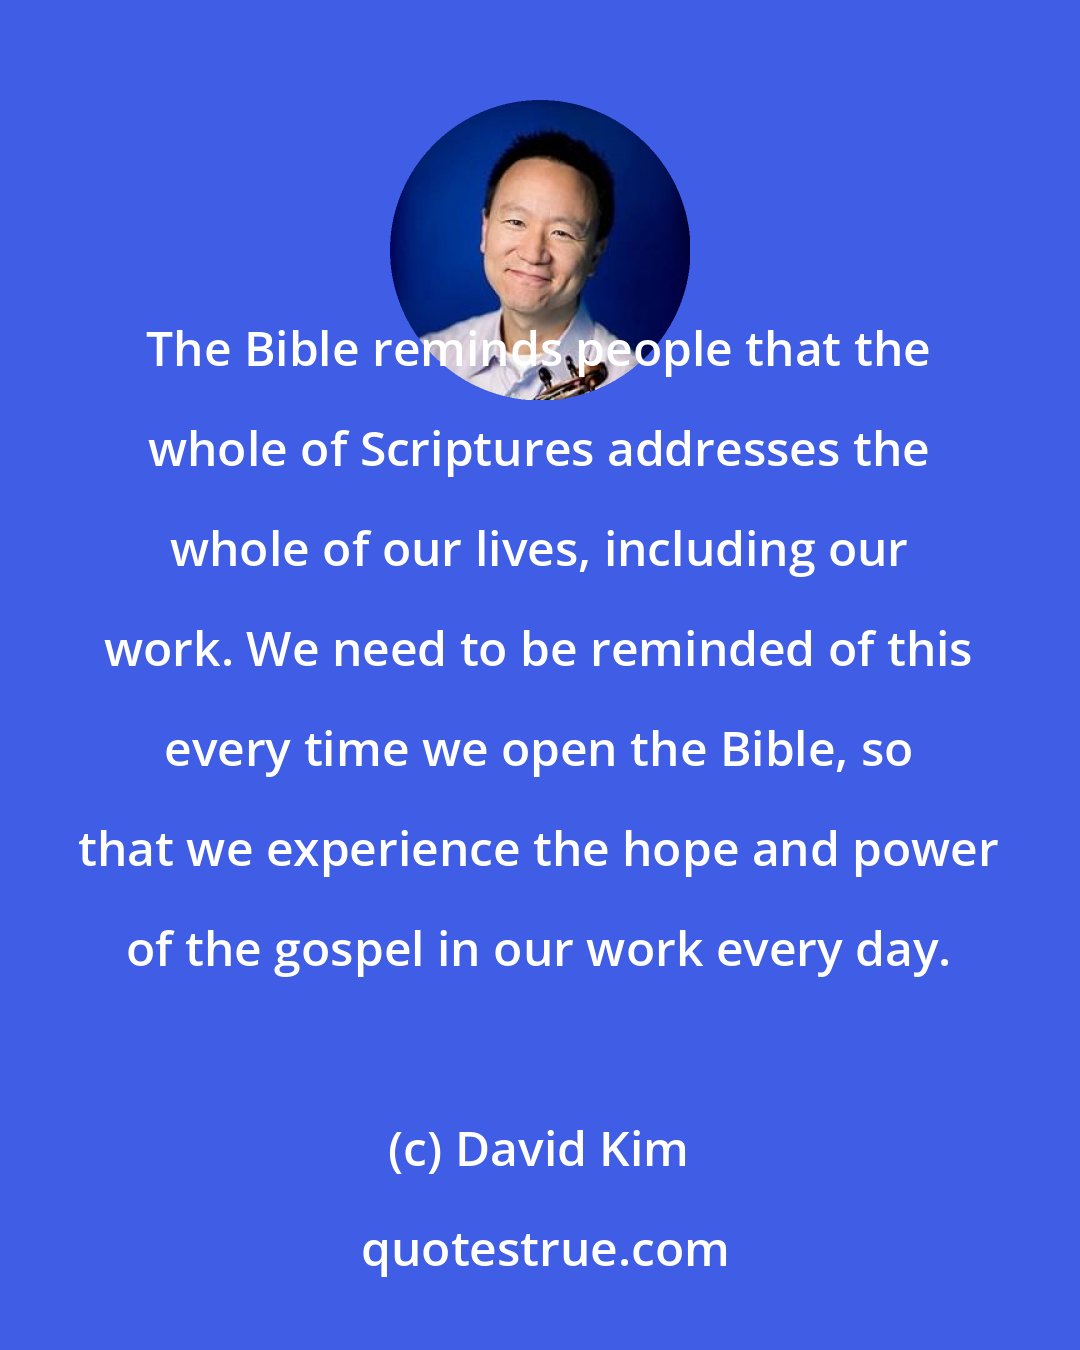 David Kim: The Bible reminds people that the whole of Scriptures addresses the whole of our lives, including our work. We need to be reminded of this every time we open the Bible, so that we experience the hope and power of the gospel in our work every day.